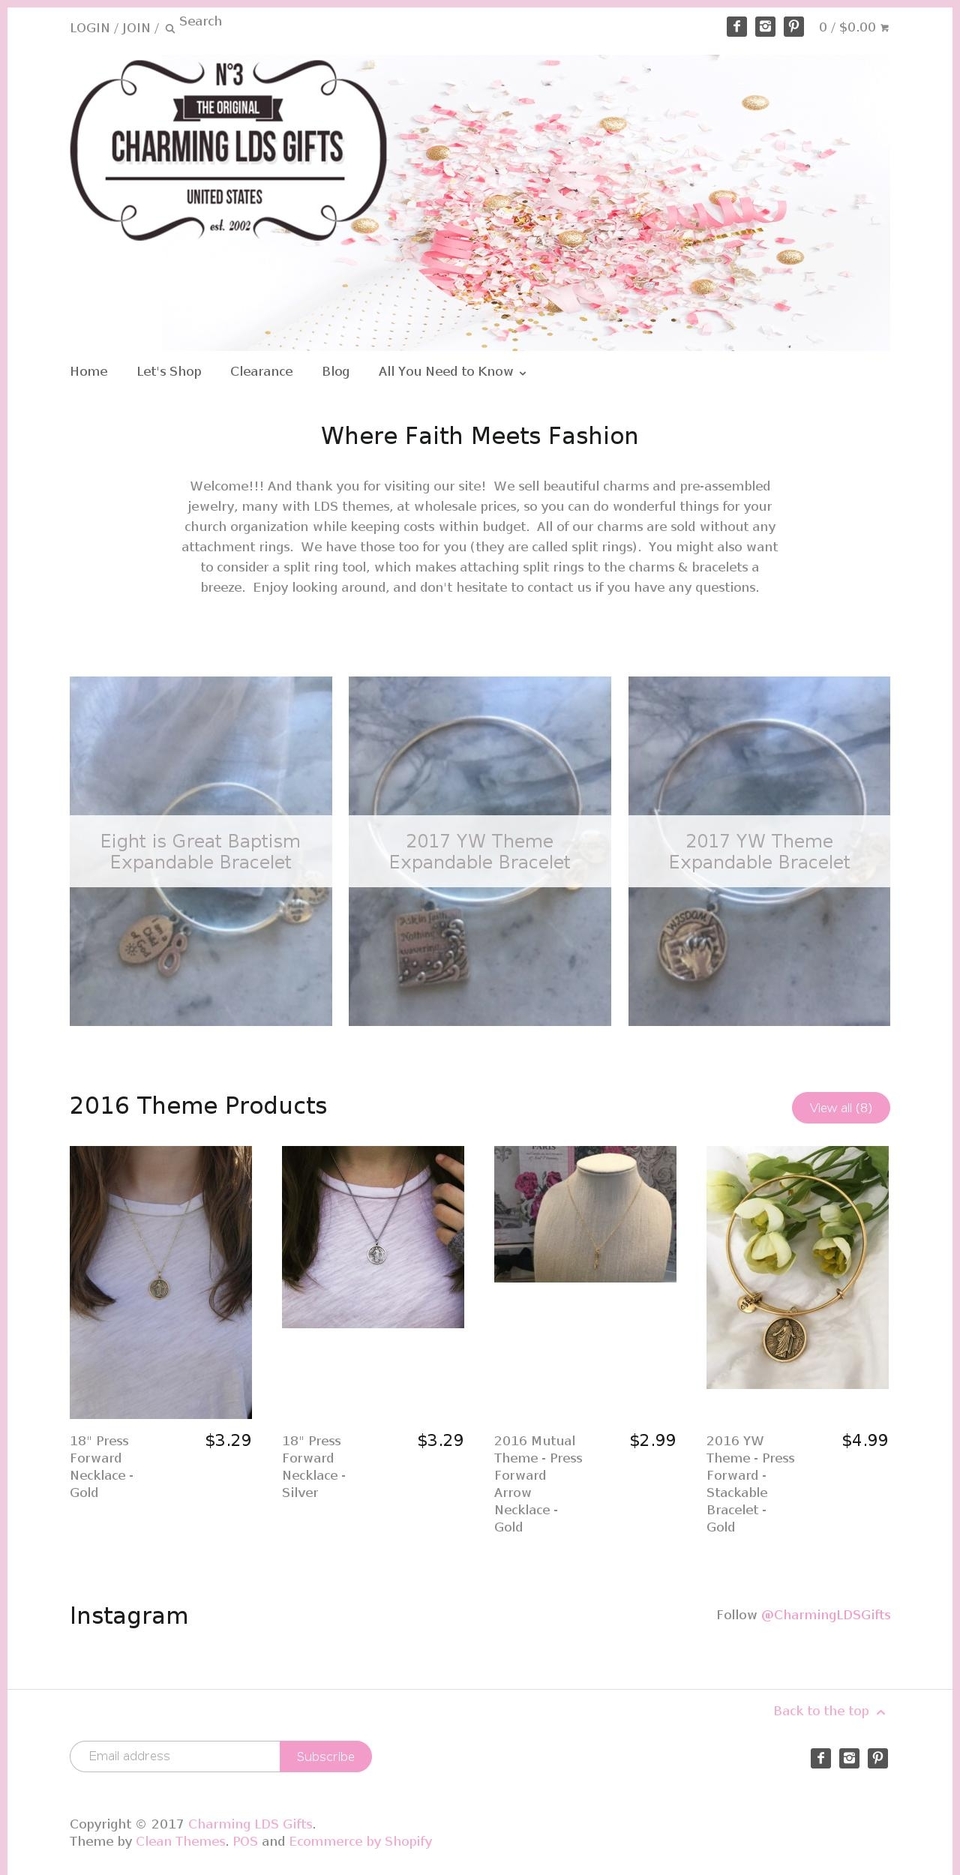 Charming LDS Gifts Shopify theme site example breezykdesign.info